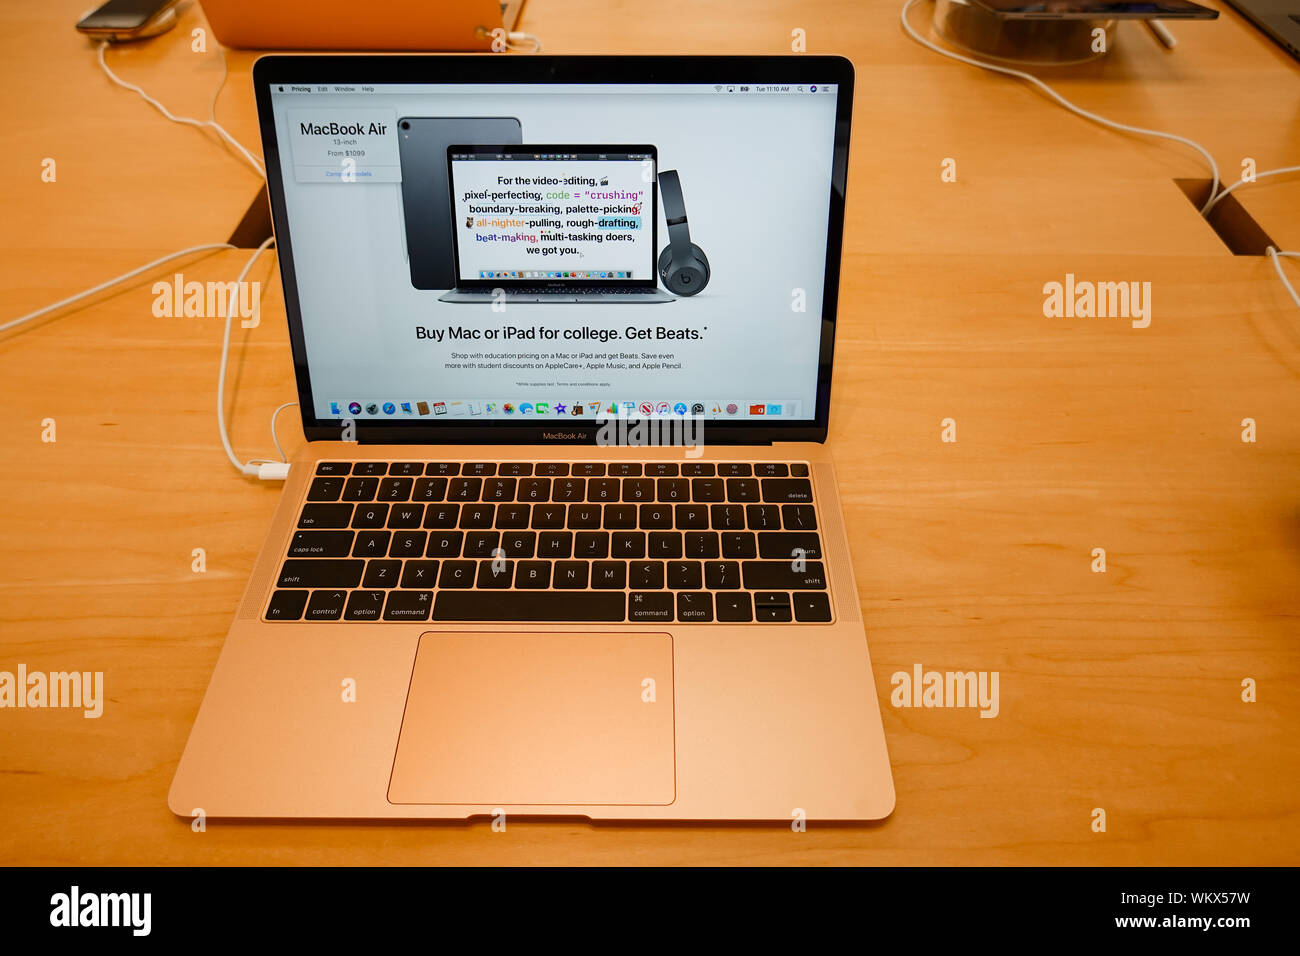 Orlando,FL/USA-8/27/19: An Apple MacBook Air on display at a retail store. Stock Photo